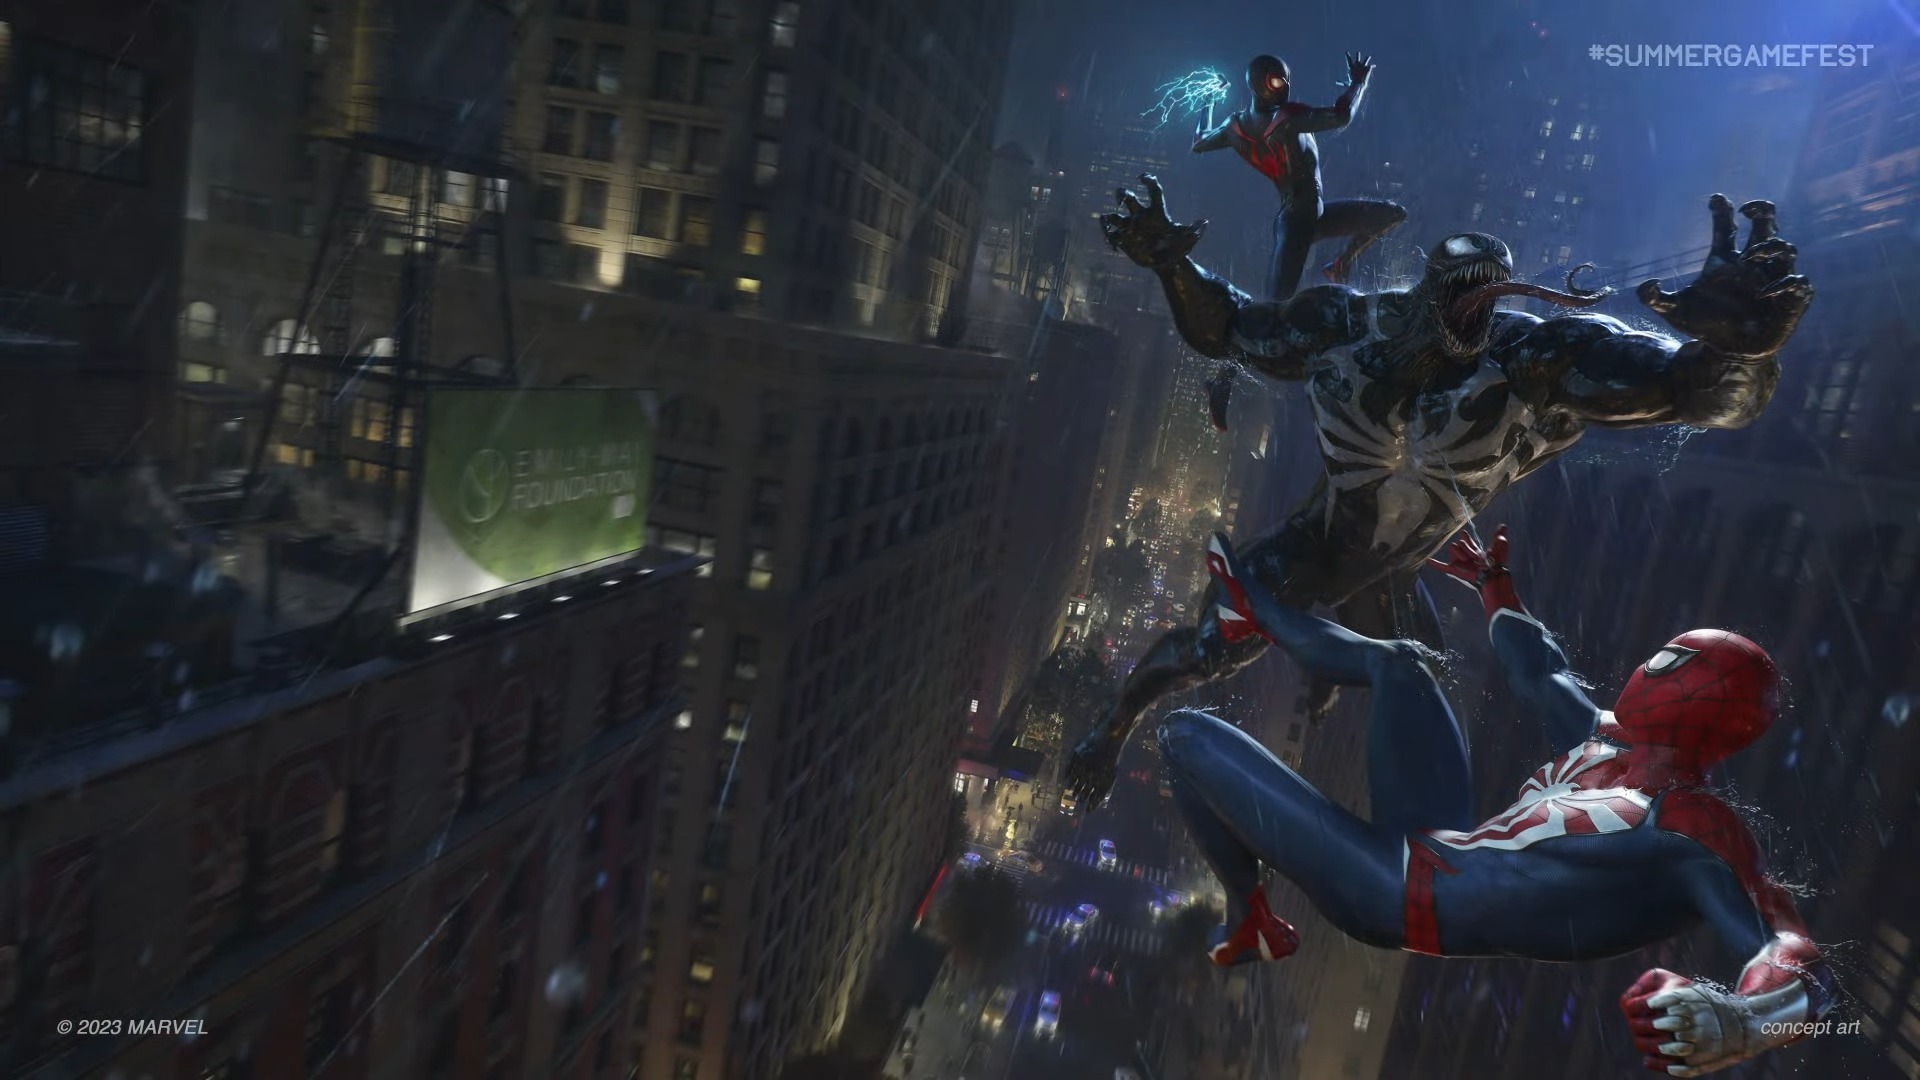 Marvel's Spider-Man 2 is out in October